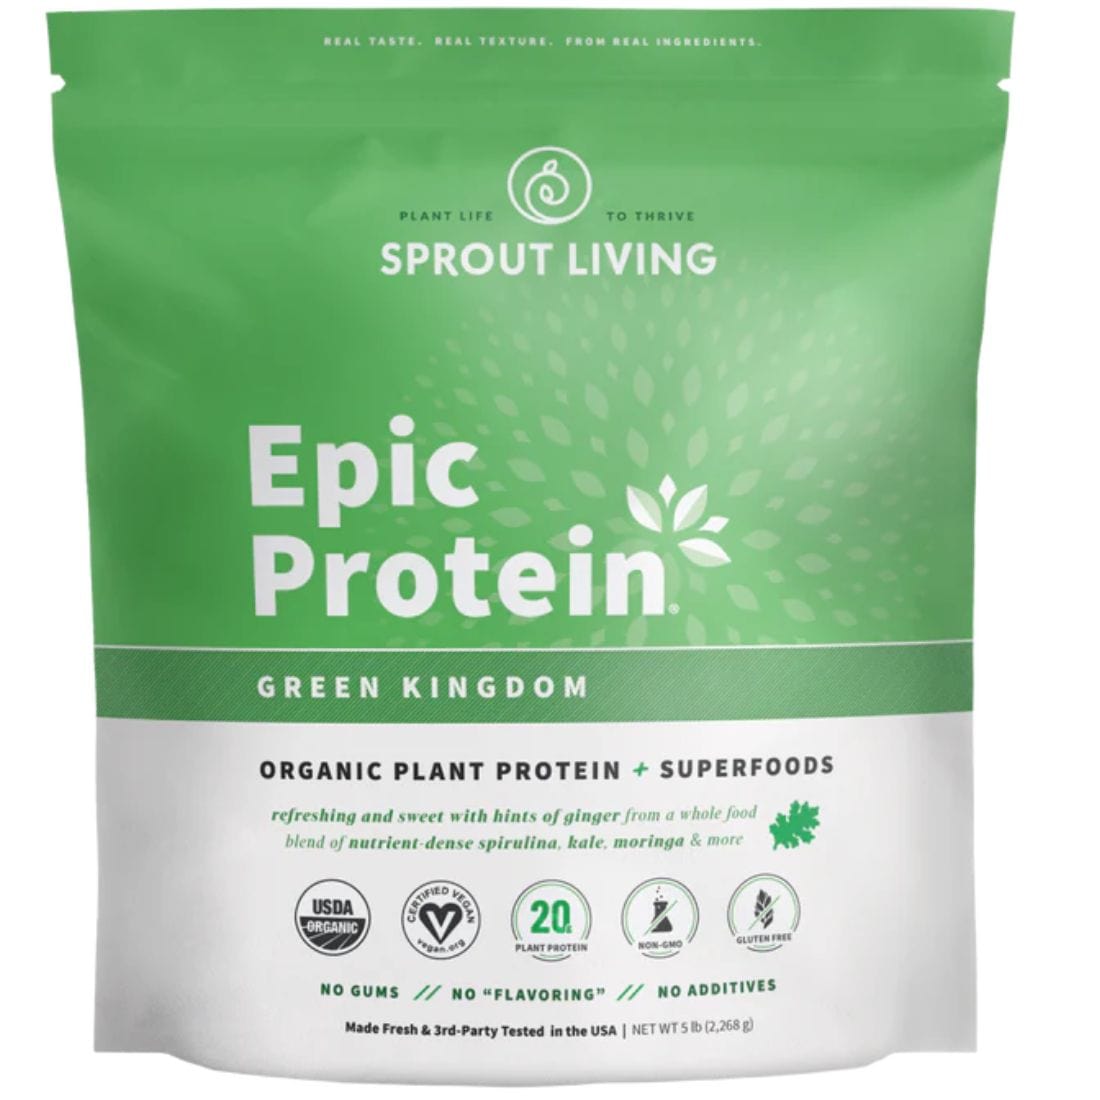 sprout-living-epic-protein-5lbs-bag-green-kingdom